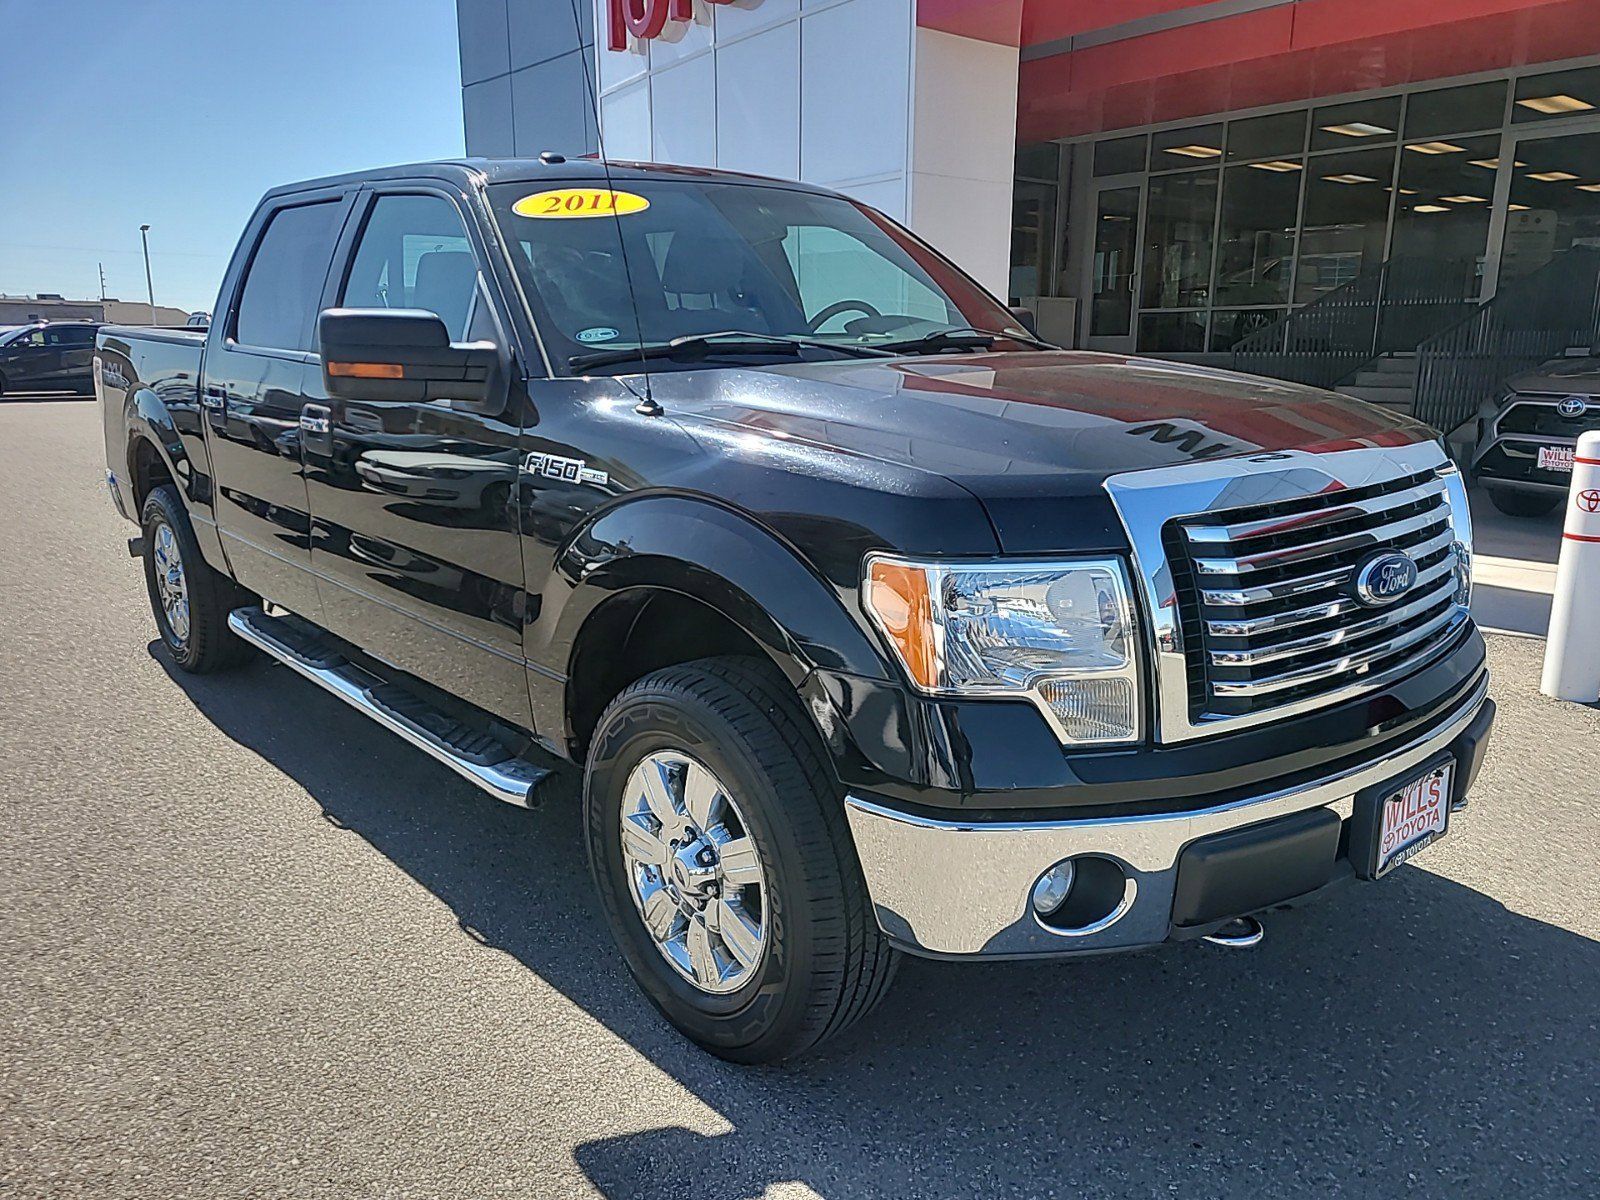 2011 - Ford - F-150 - $7,997